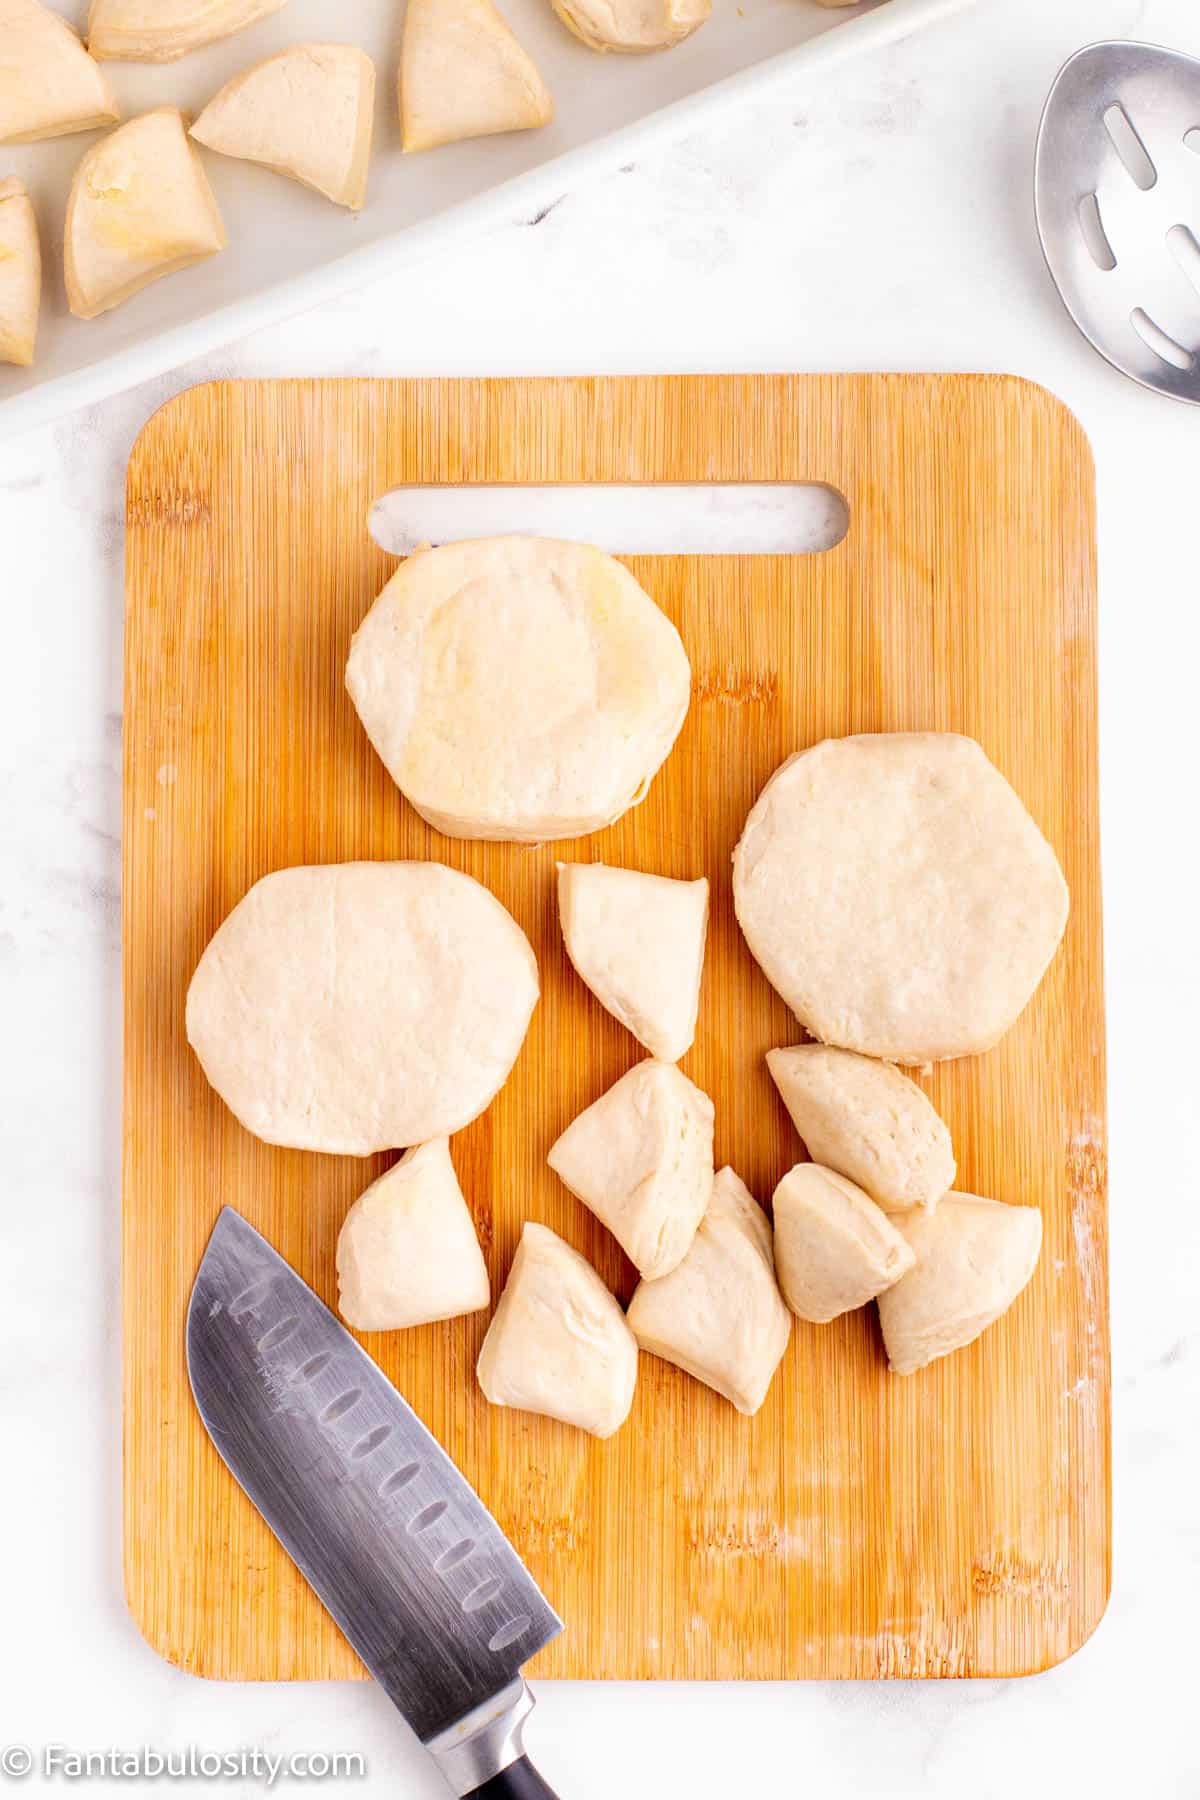 Biscuits on a cutting board being cut into pieces.